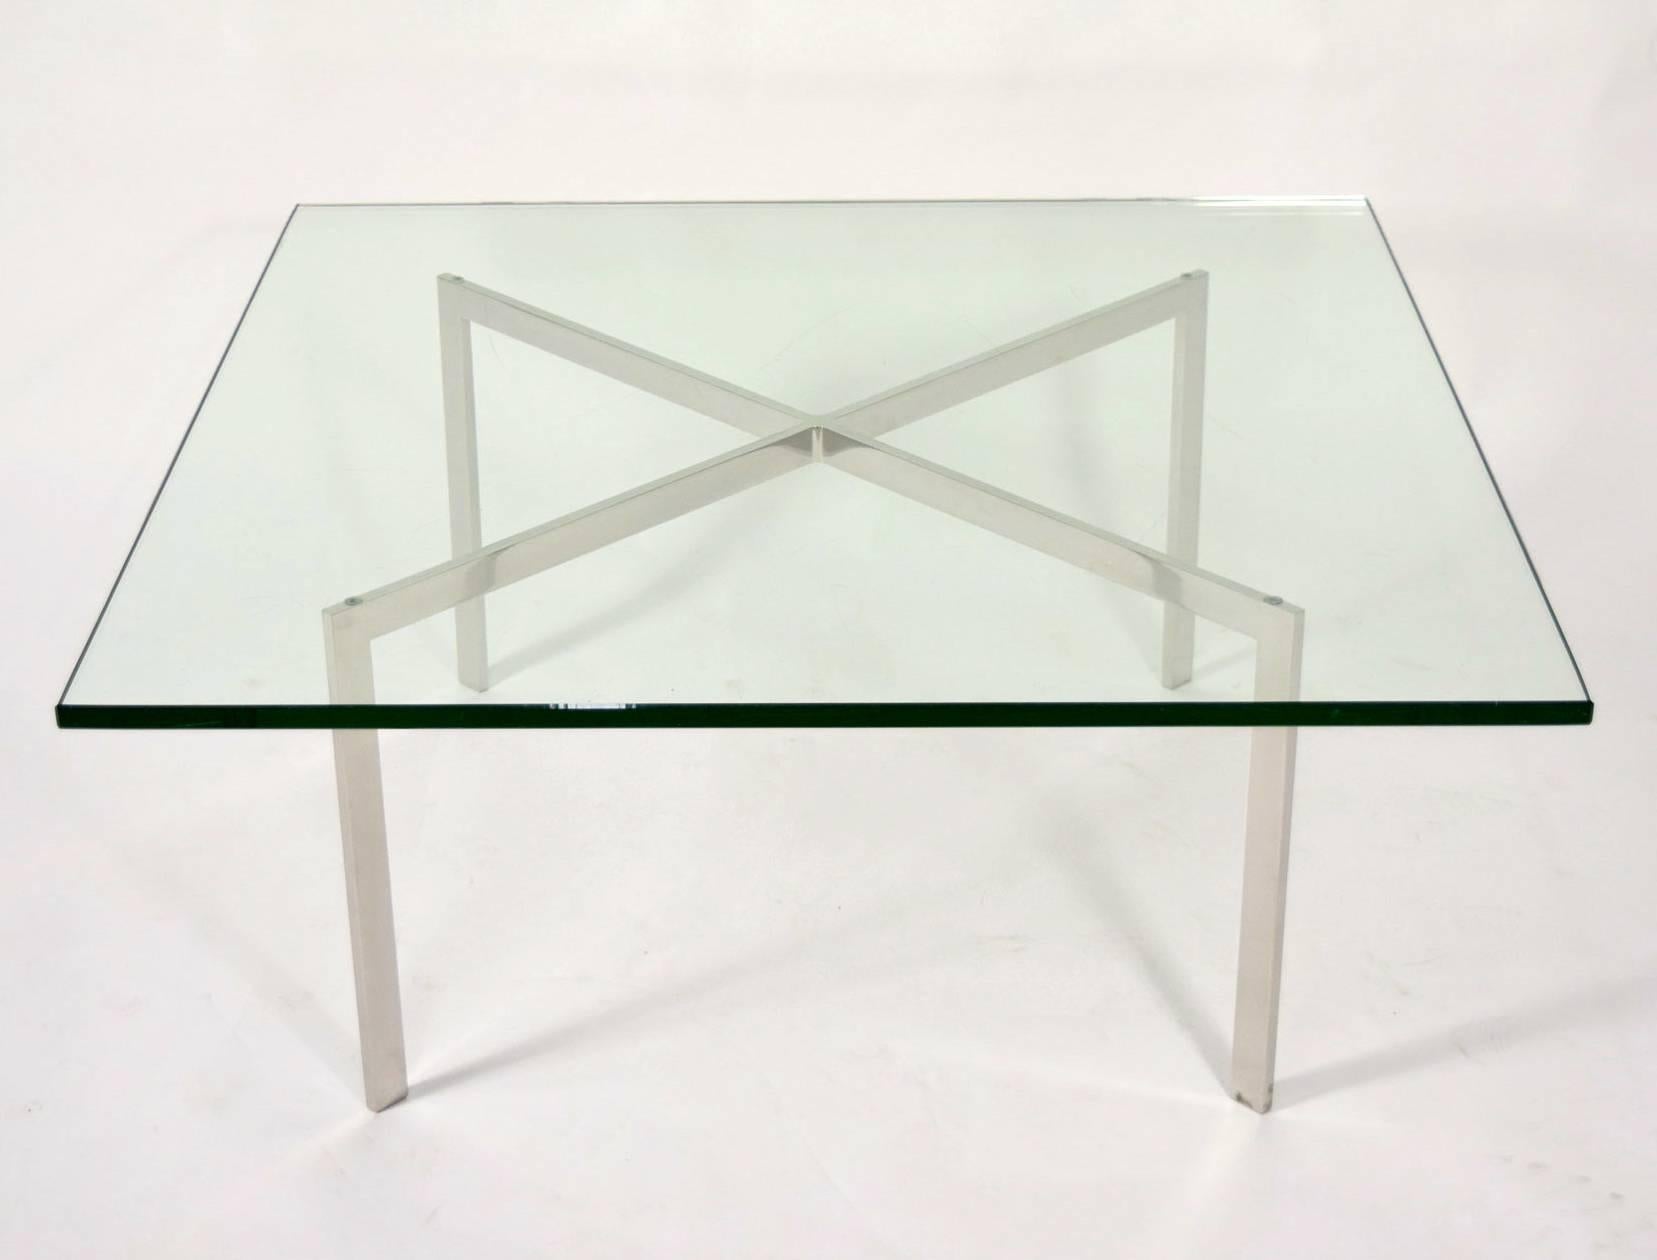 20th Century Barcelona Table by Mies van der Rohe for Knoll